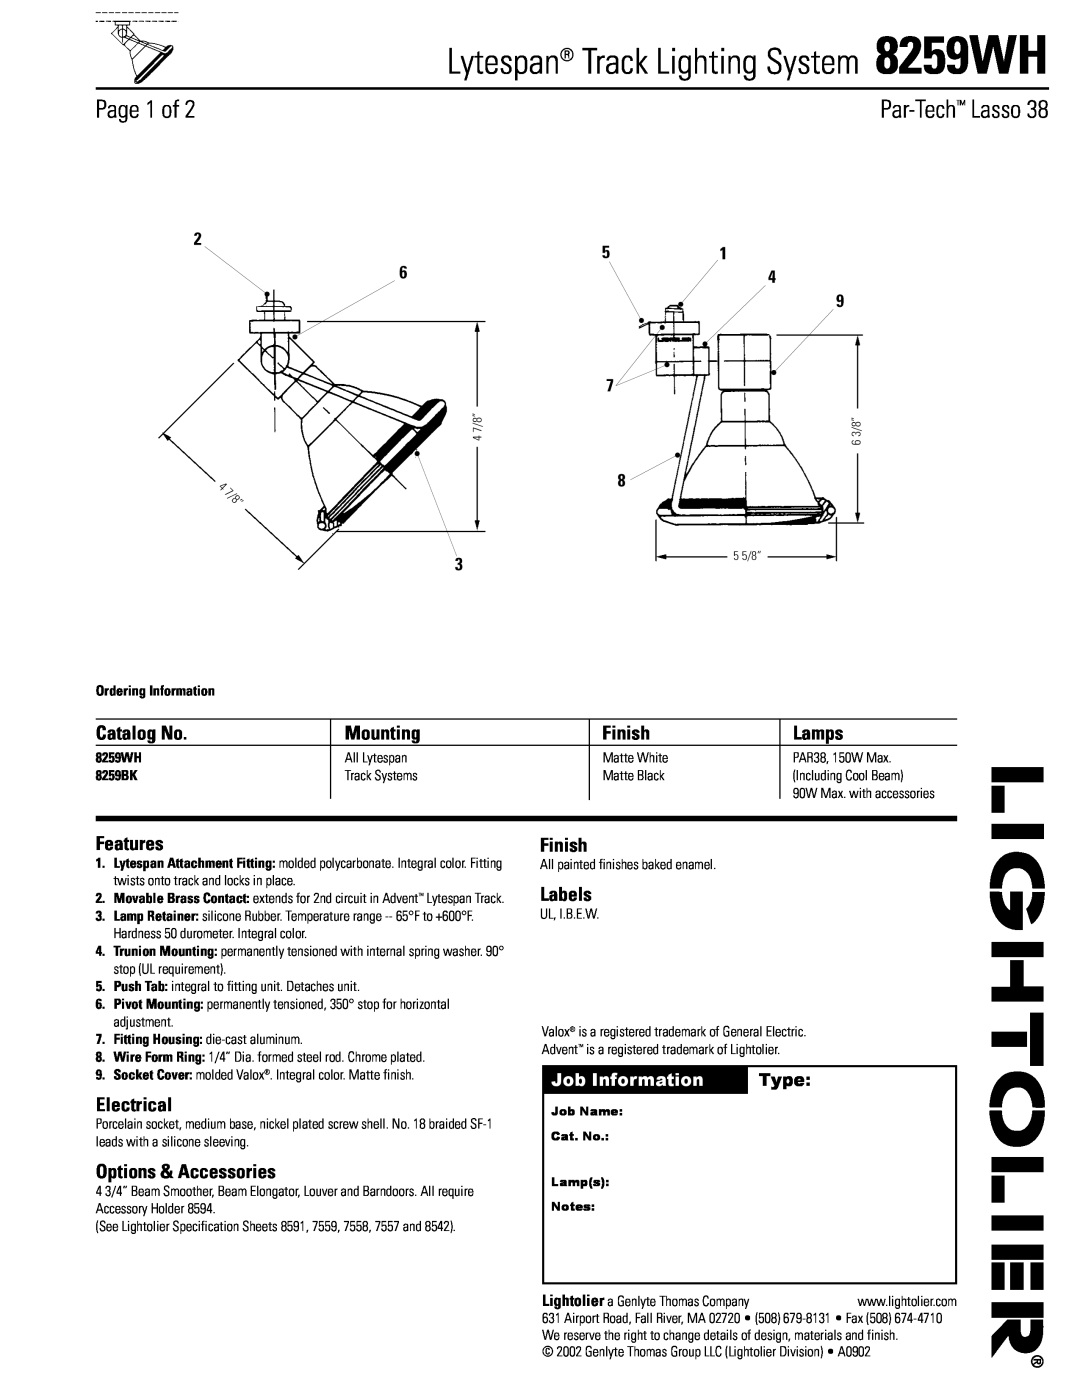 Lightolier 8259WH specifications Par-Tech Lasso, Job Information, Type, Ordering Information, 8259BK, Page 1 of, Mounting 